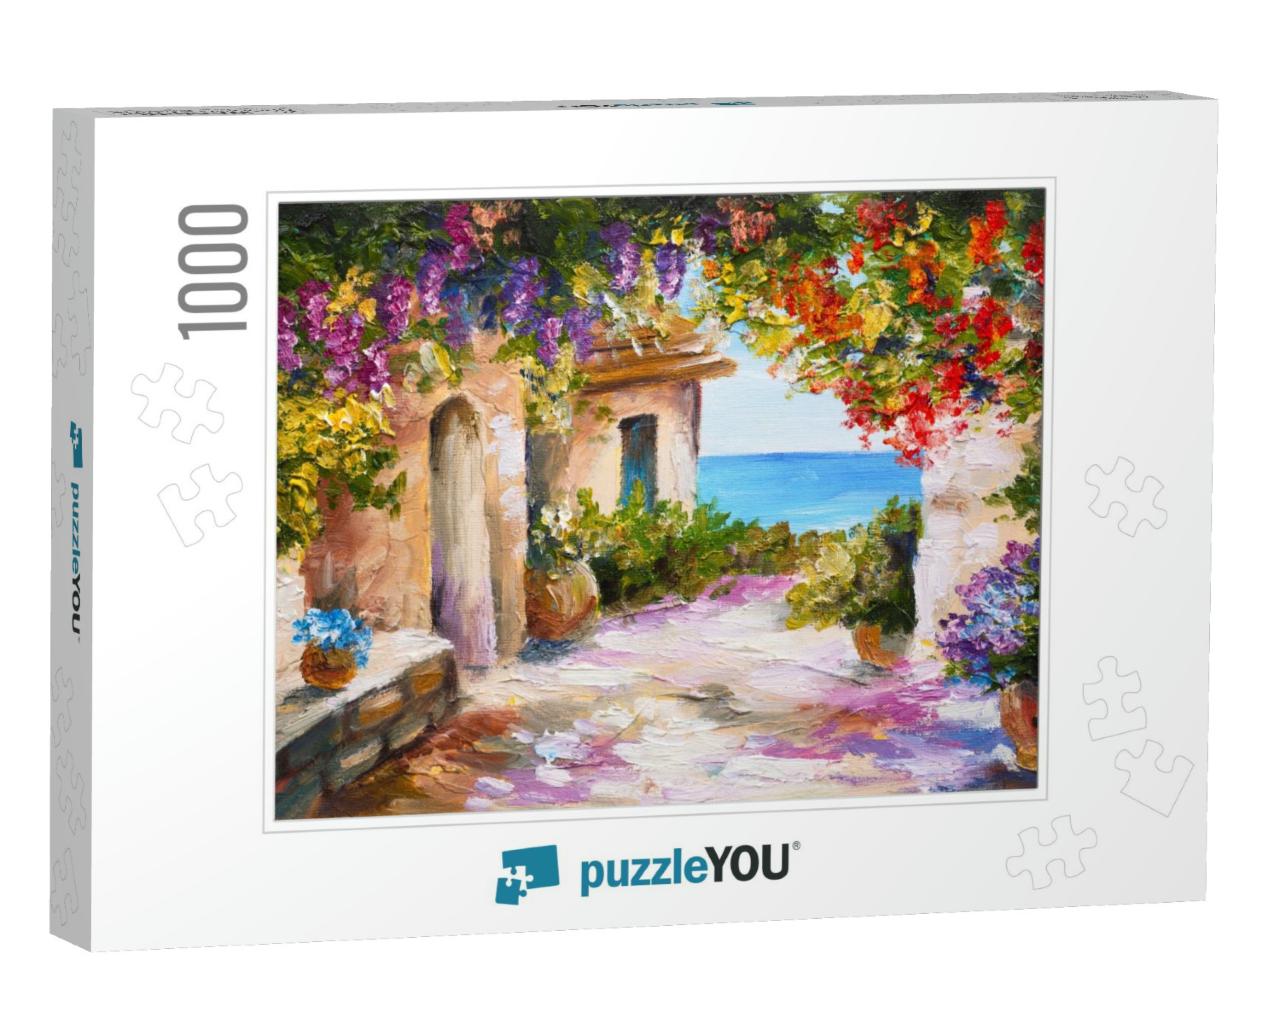 Oil Painting - House Near the Sea, Colorful Flowers, Summ... Jigsaw Puzzle with 1000 pieces